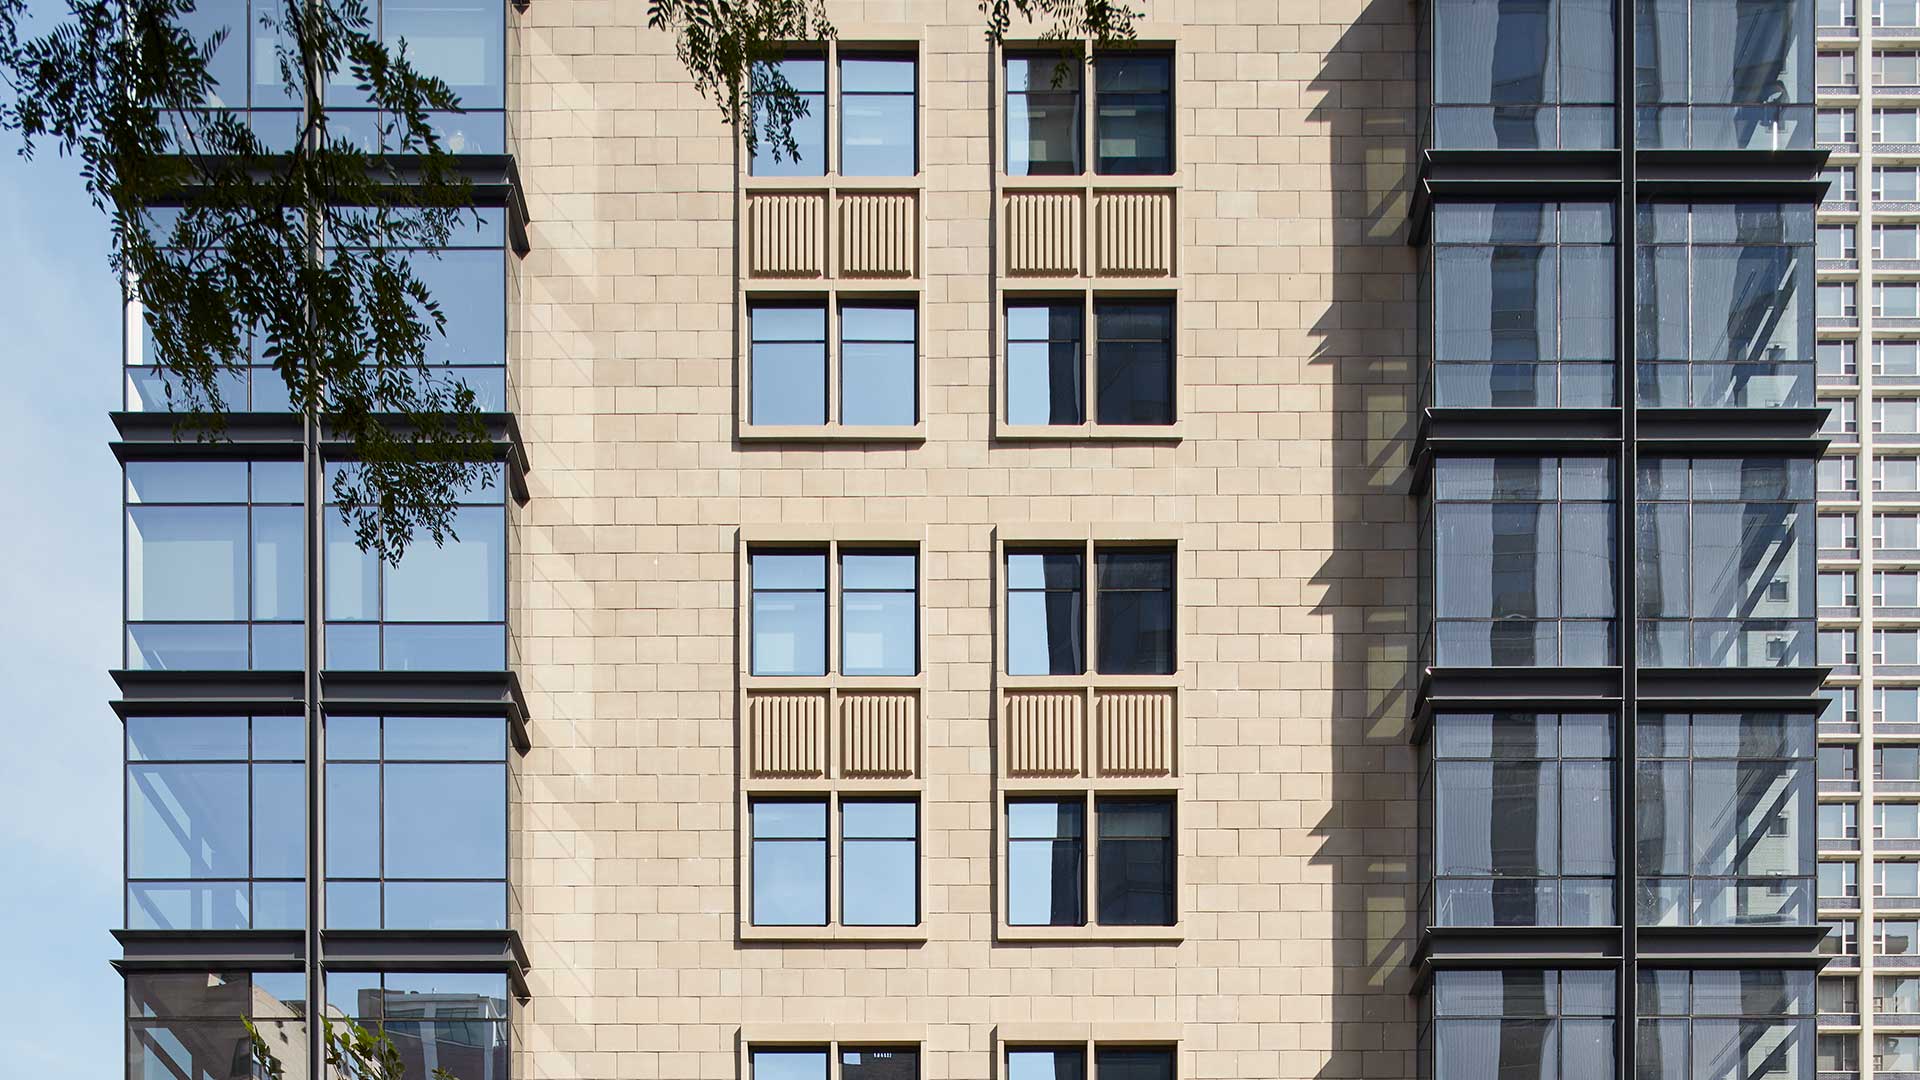 A close-up of the exterior of 61 Banks Street, stone facade and windows.